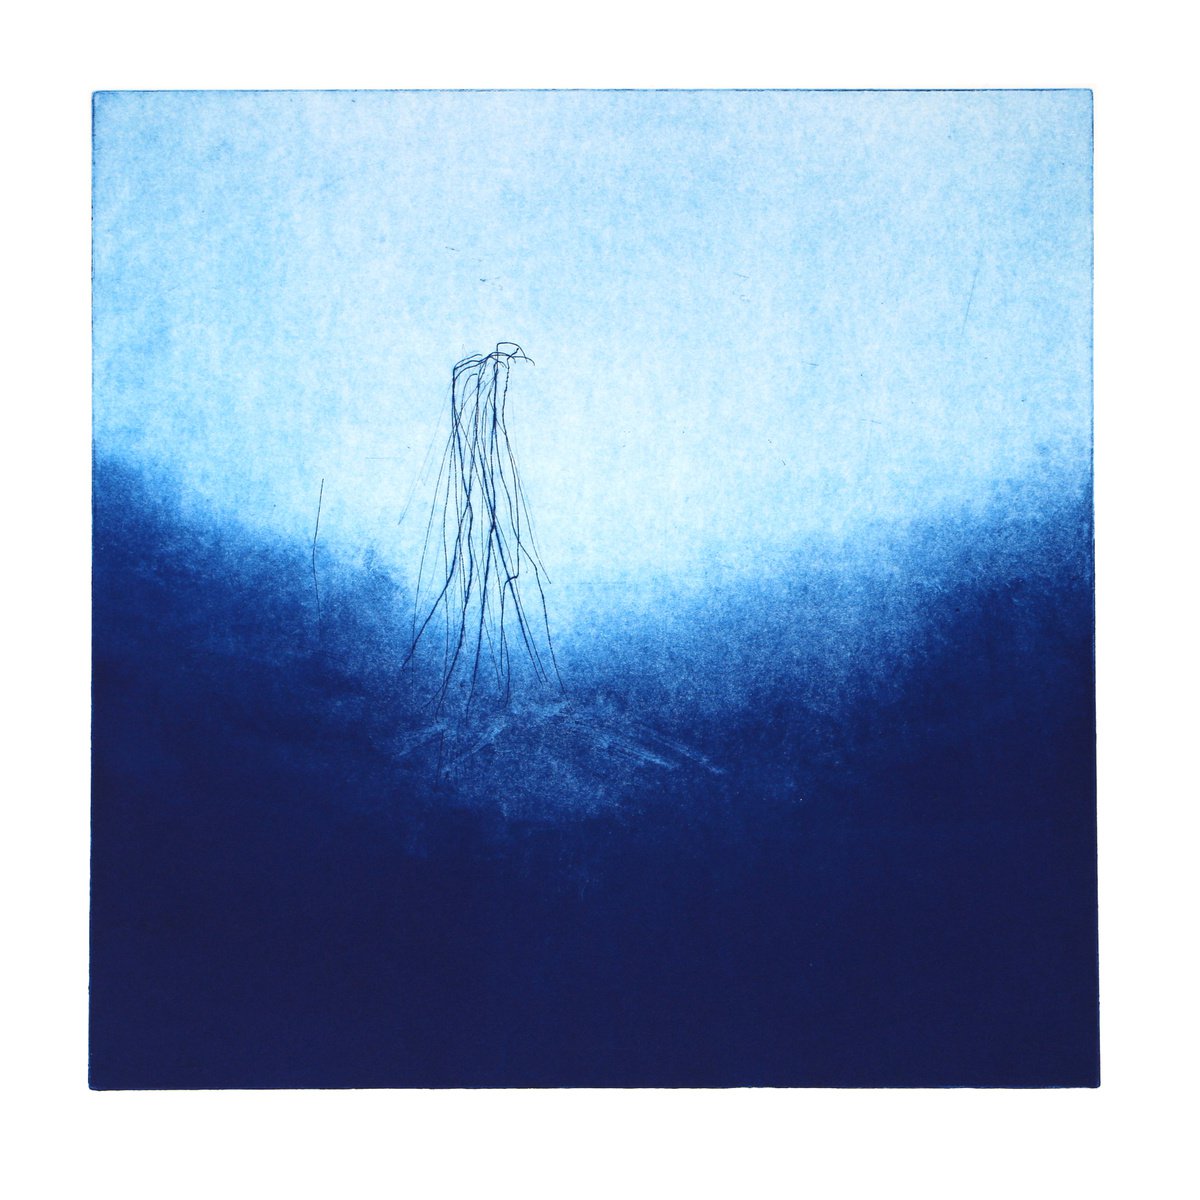 Heike Roesel Blue Day 1 fine art etching, monotype in a series of 20 by Heike Roesel